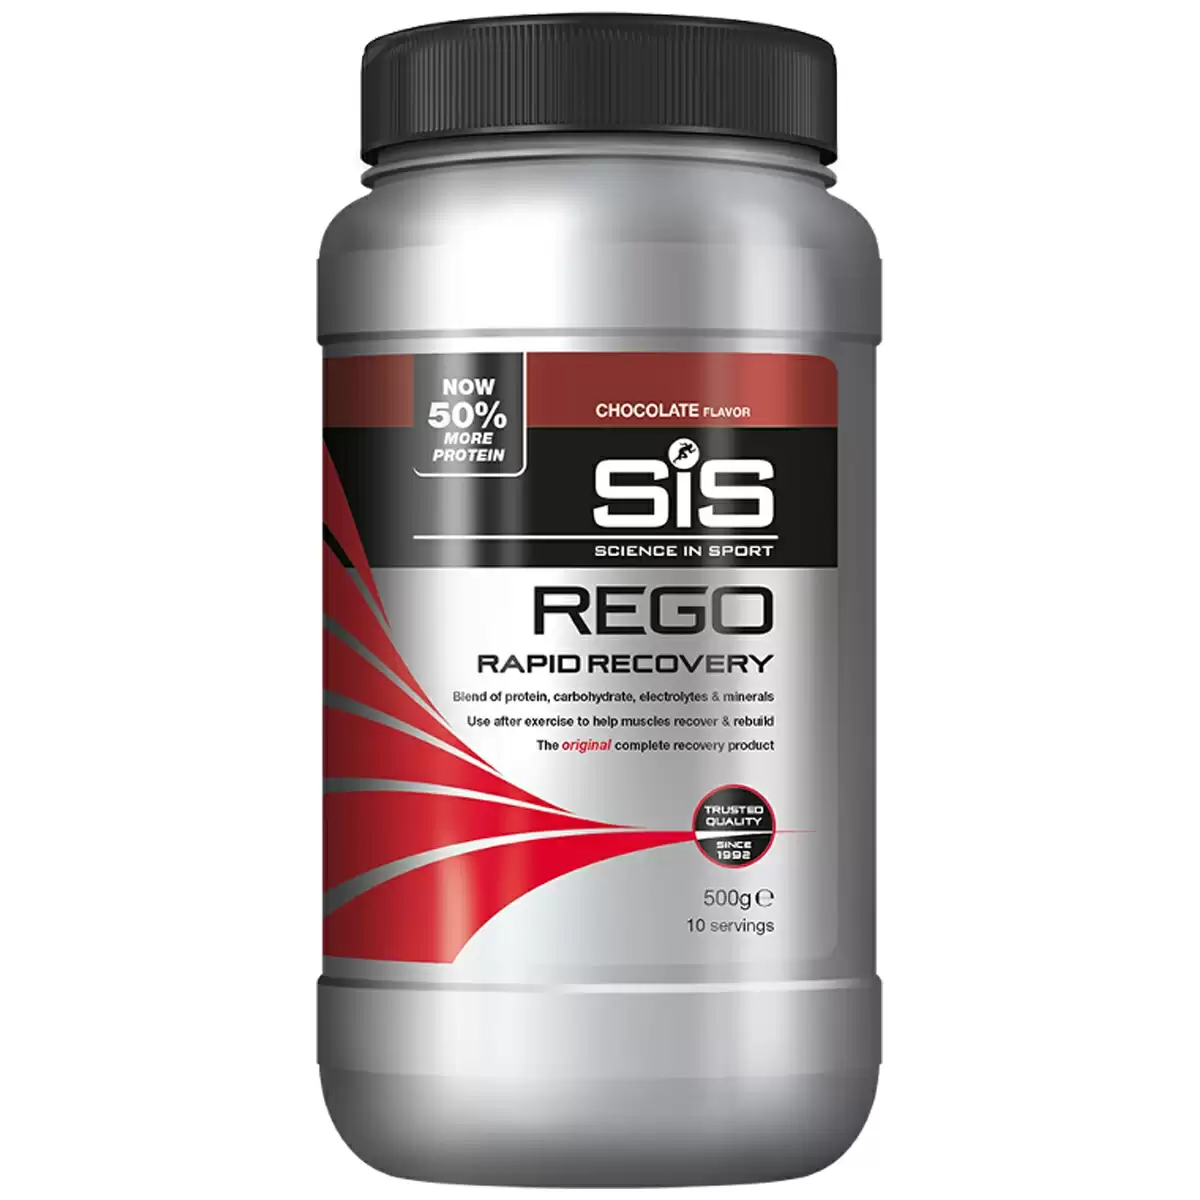 Rego Rapid Recovery Drink Chocolate Flavor 500g - image